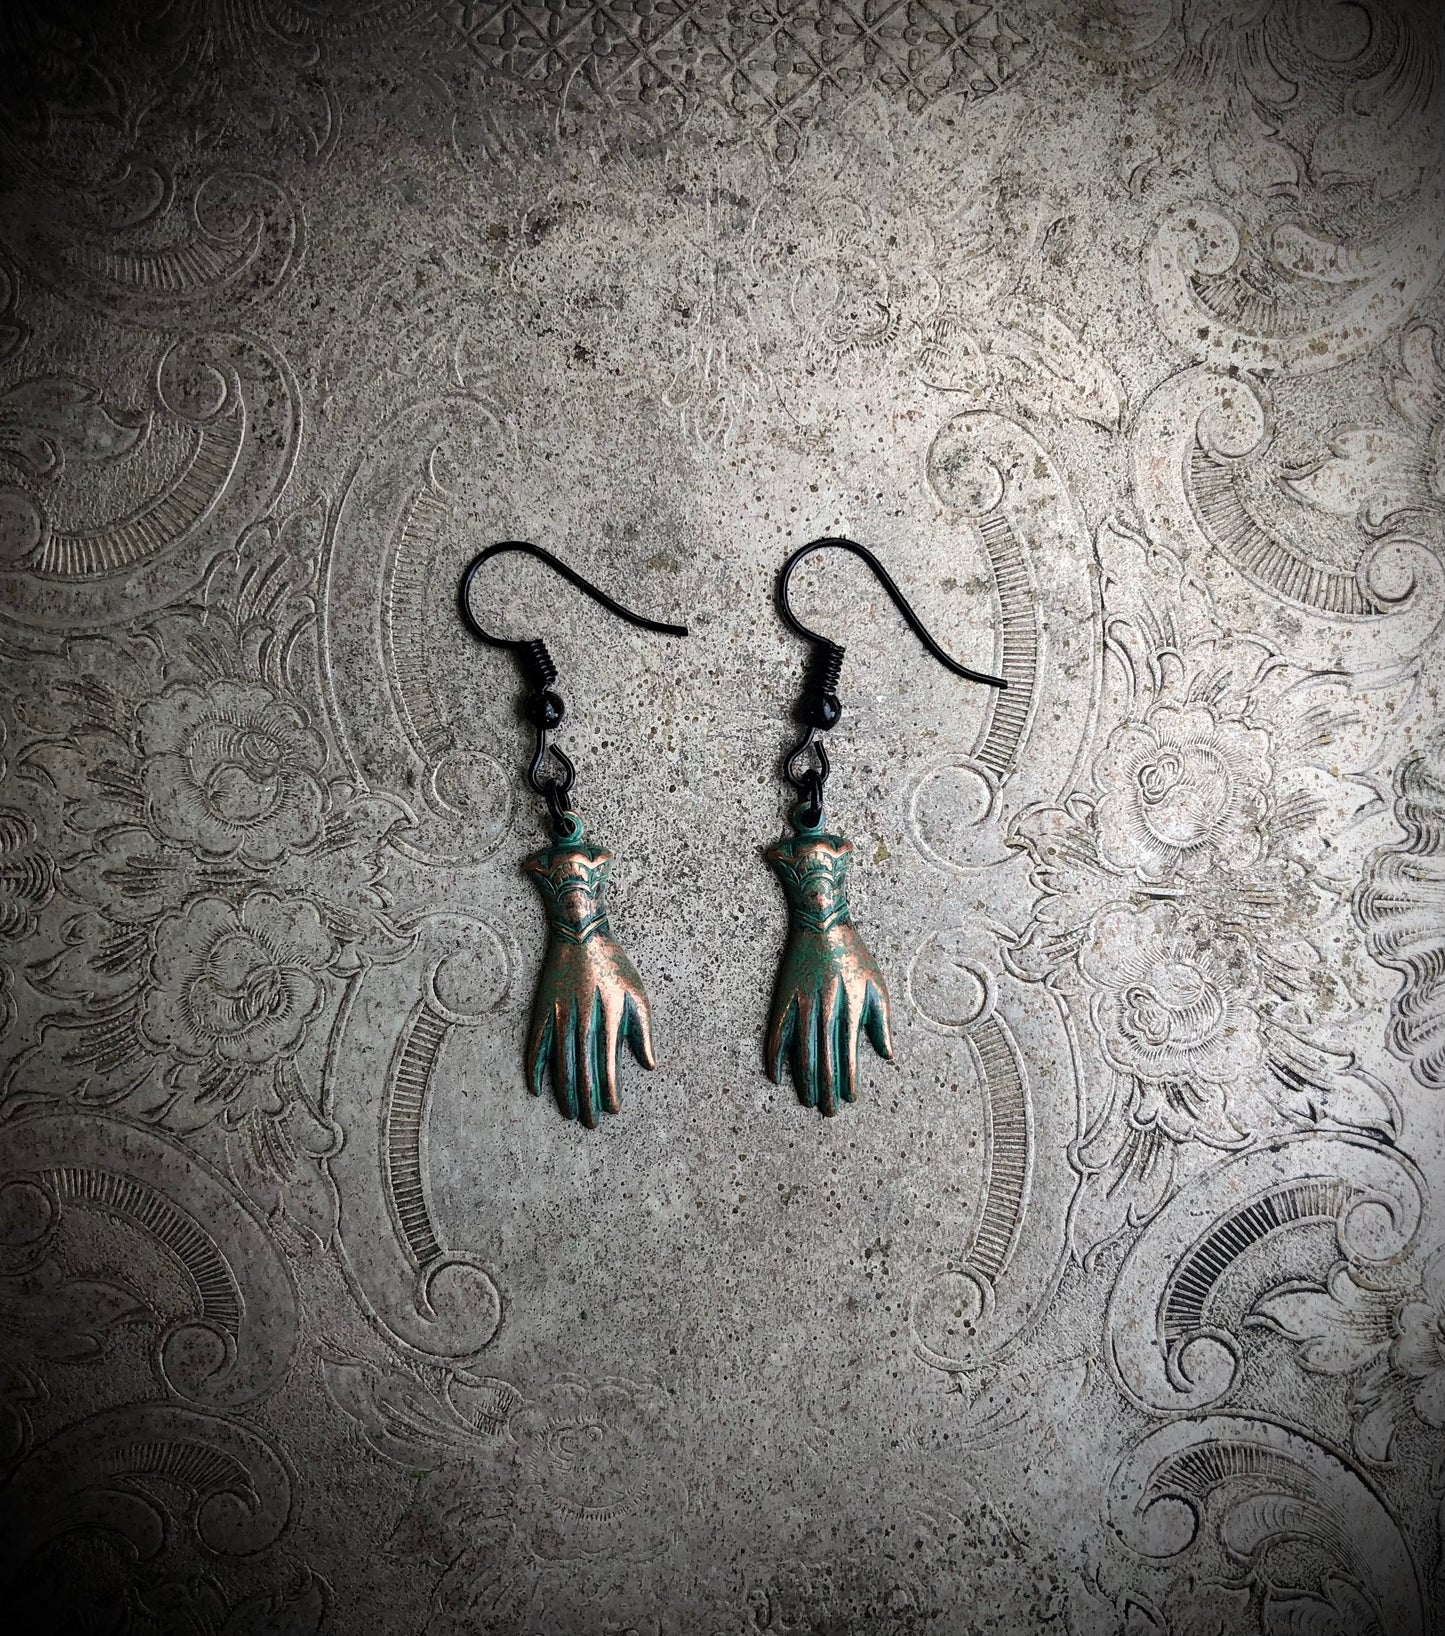 Antiqued Victorian Hand Earrings